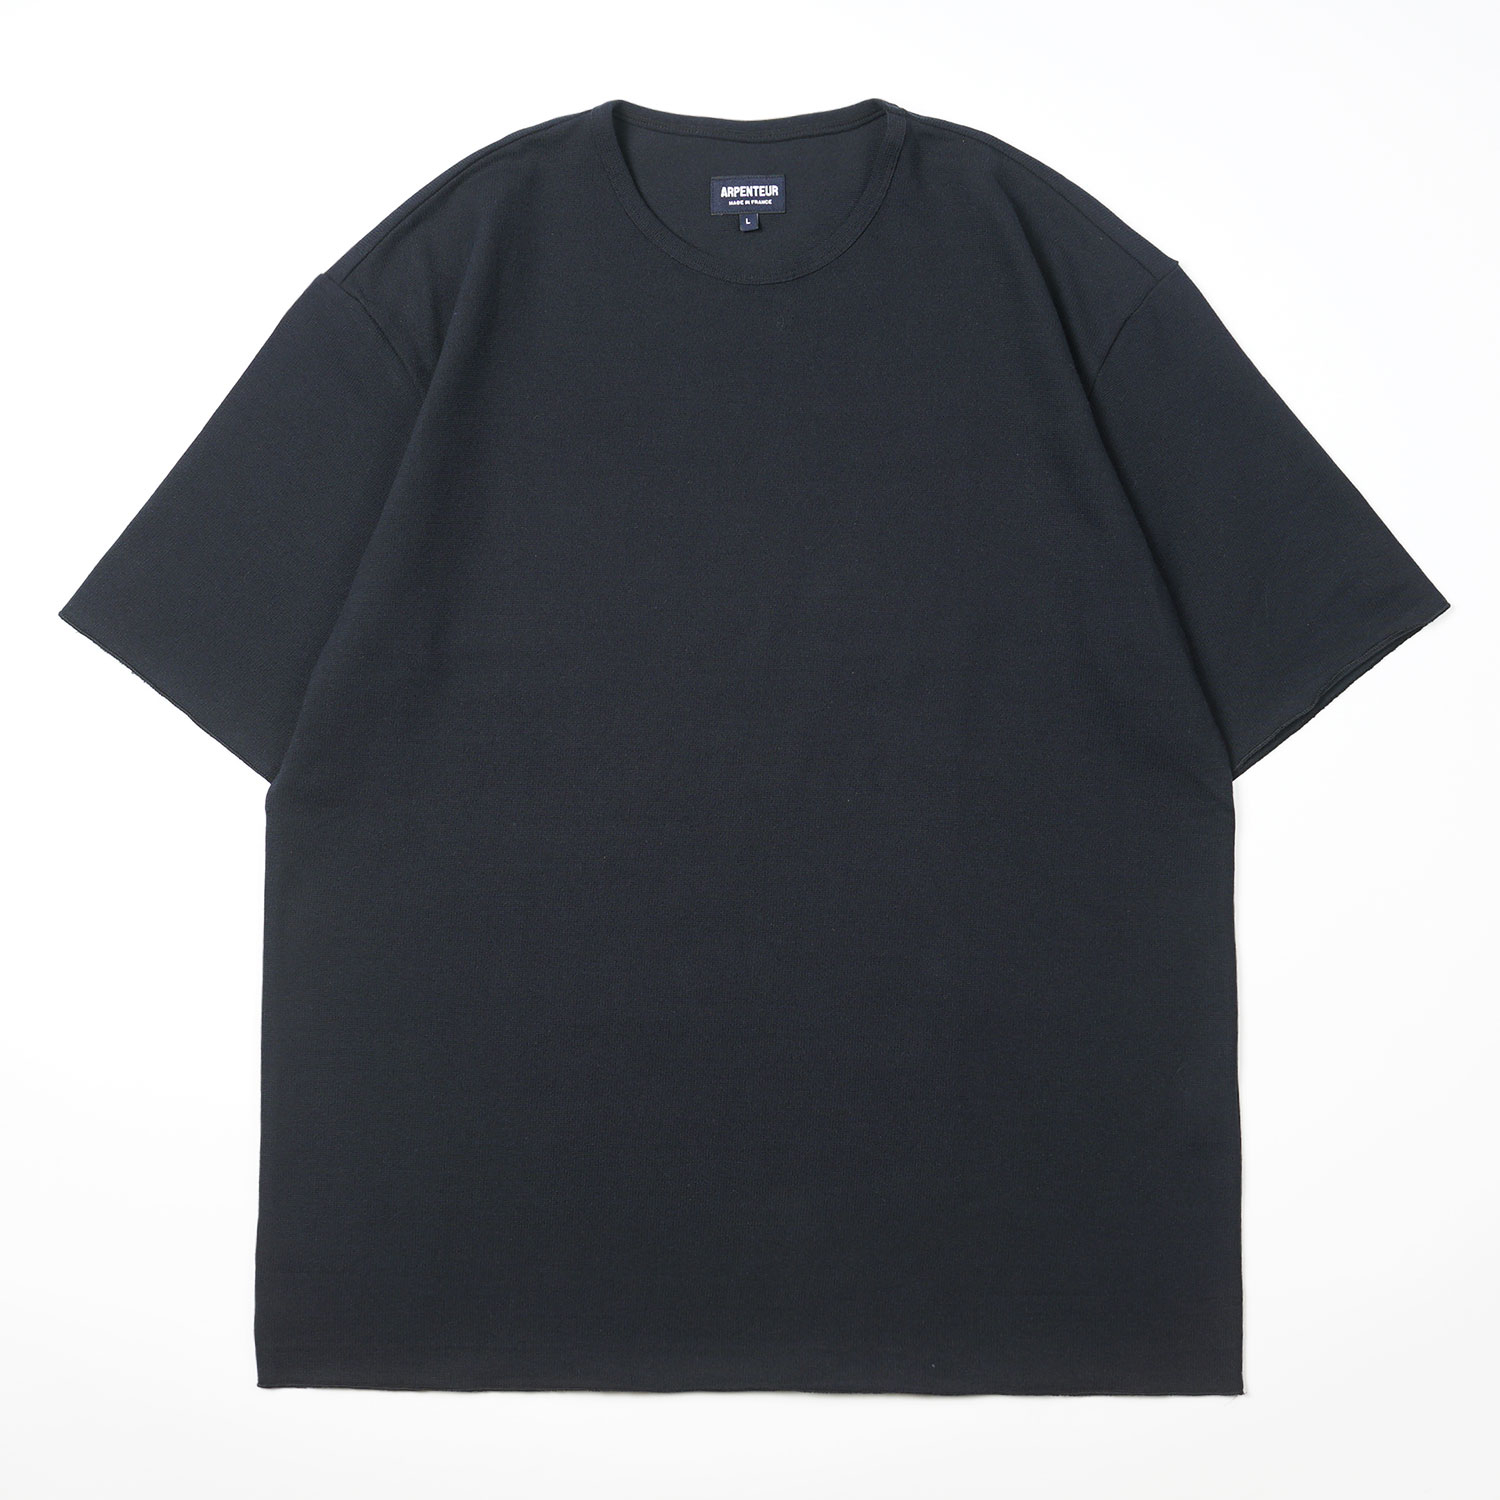 Pontus t-shirt in Midnight blue color by Arpenteur